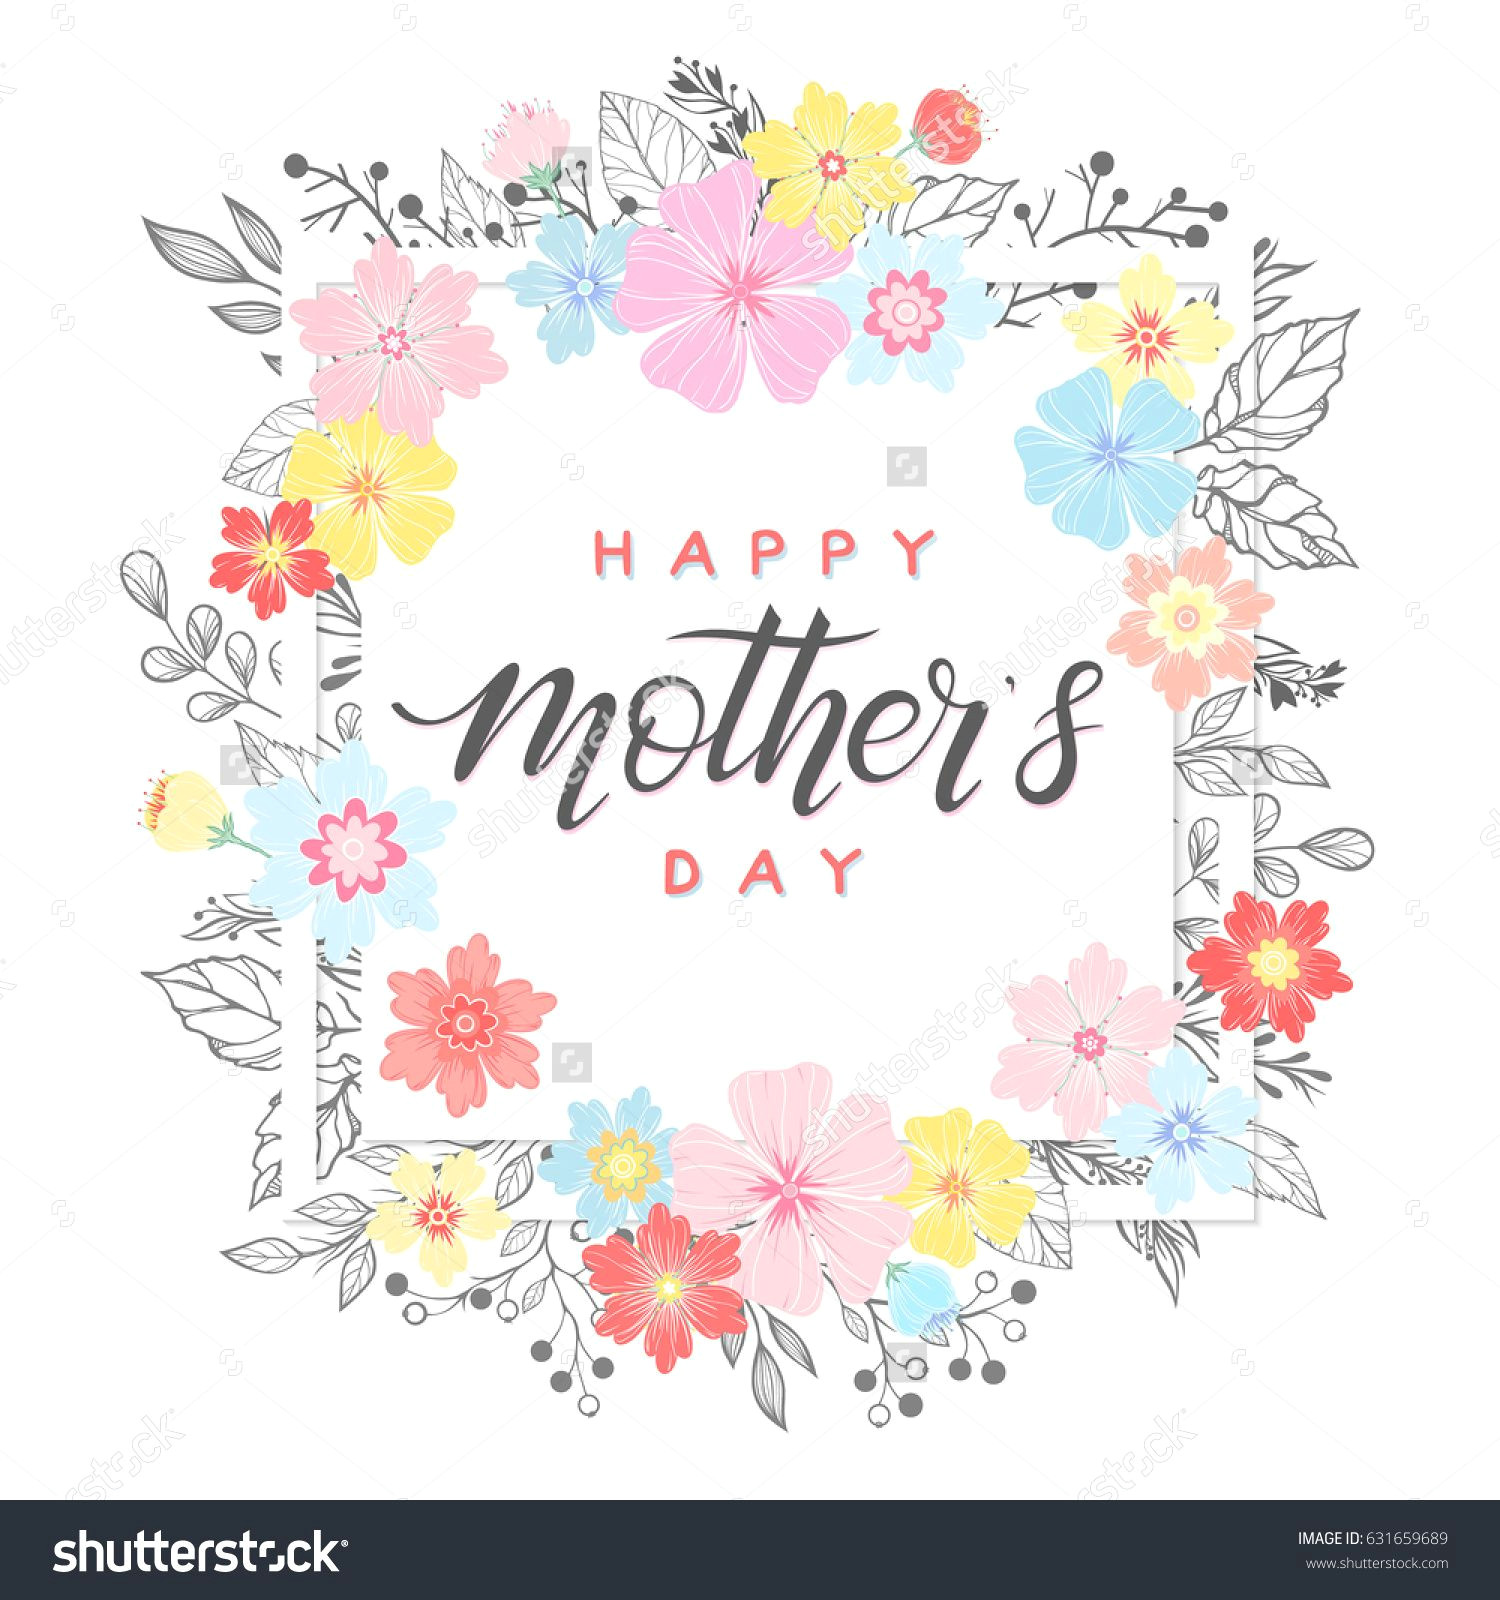 happy mothers day typography happy mothers day hand drawn lettering with floral elements leaves and flowers seasons greetings card perfect for prints